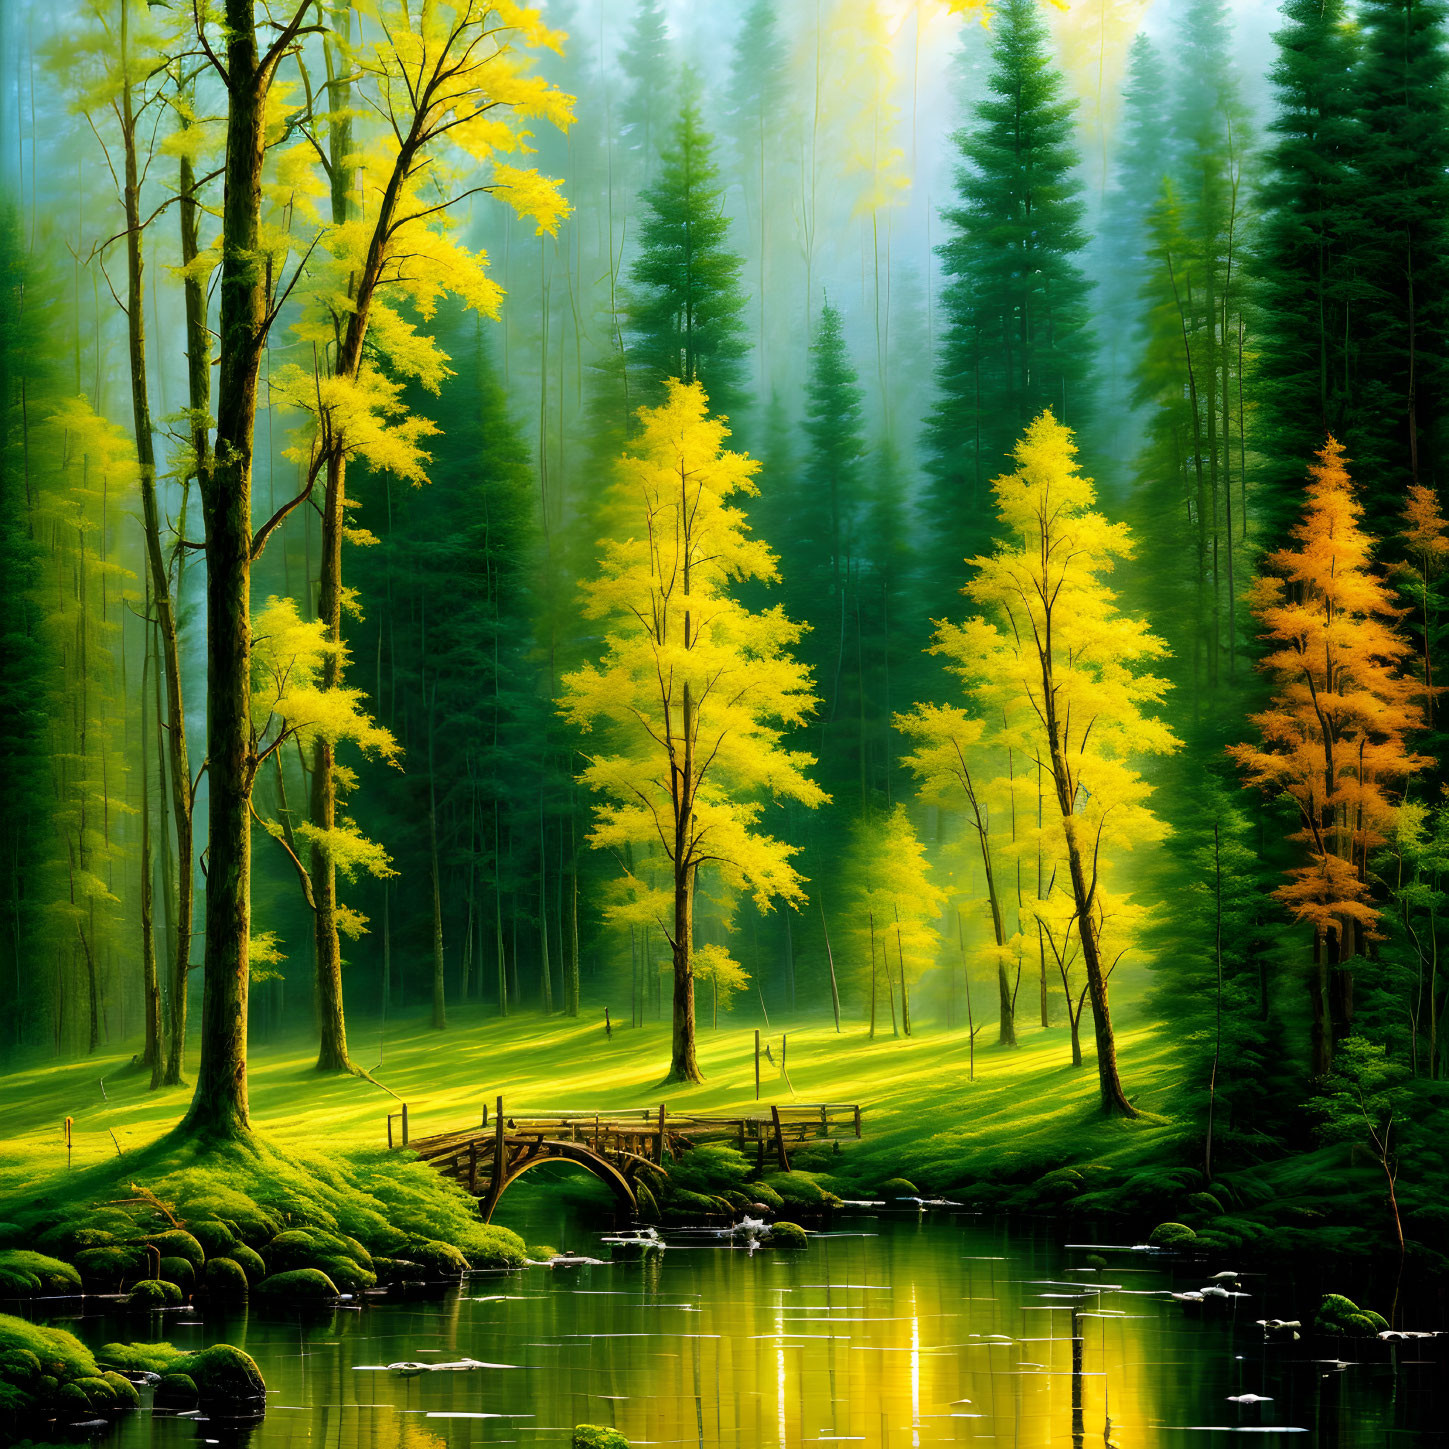 Verdant forest with yellow foliage and serene pond.